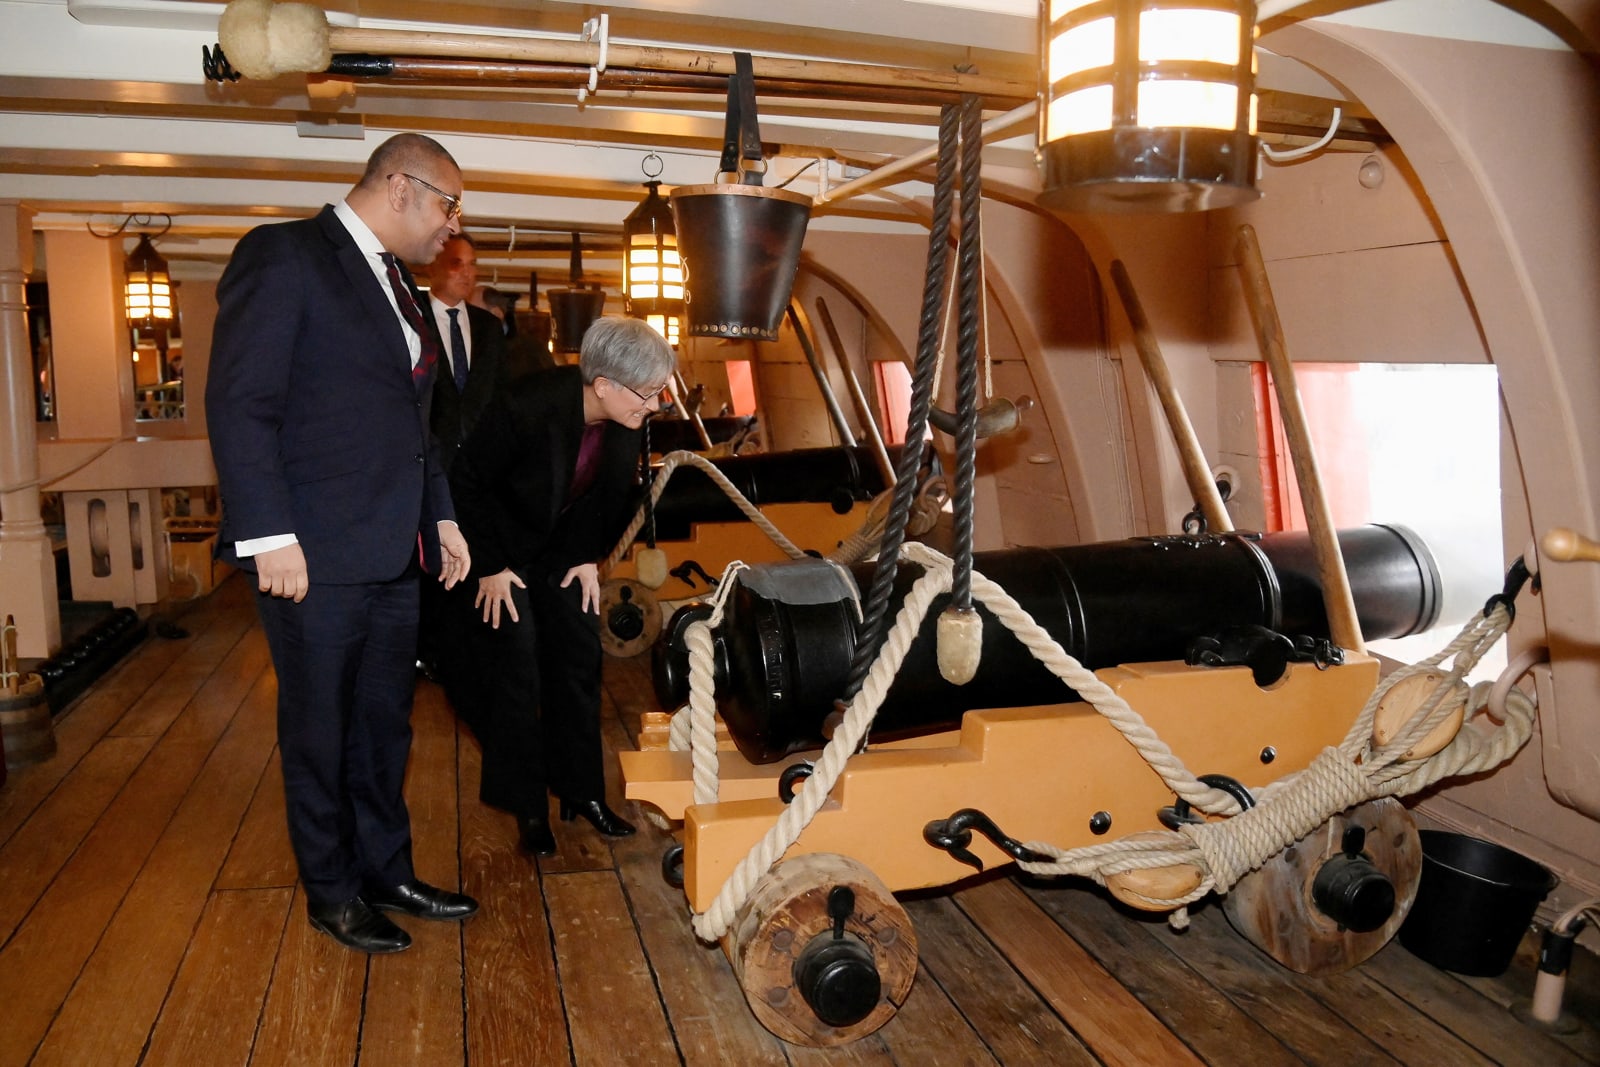 Australia's Foreign Minister Penny Wong and British Foreign Secretary James Cleverly view a cannon on the gun deck of British warship HMS Victory in Portsmouth, England (Toby Melville via Getty Images)